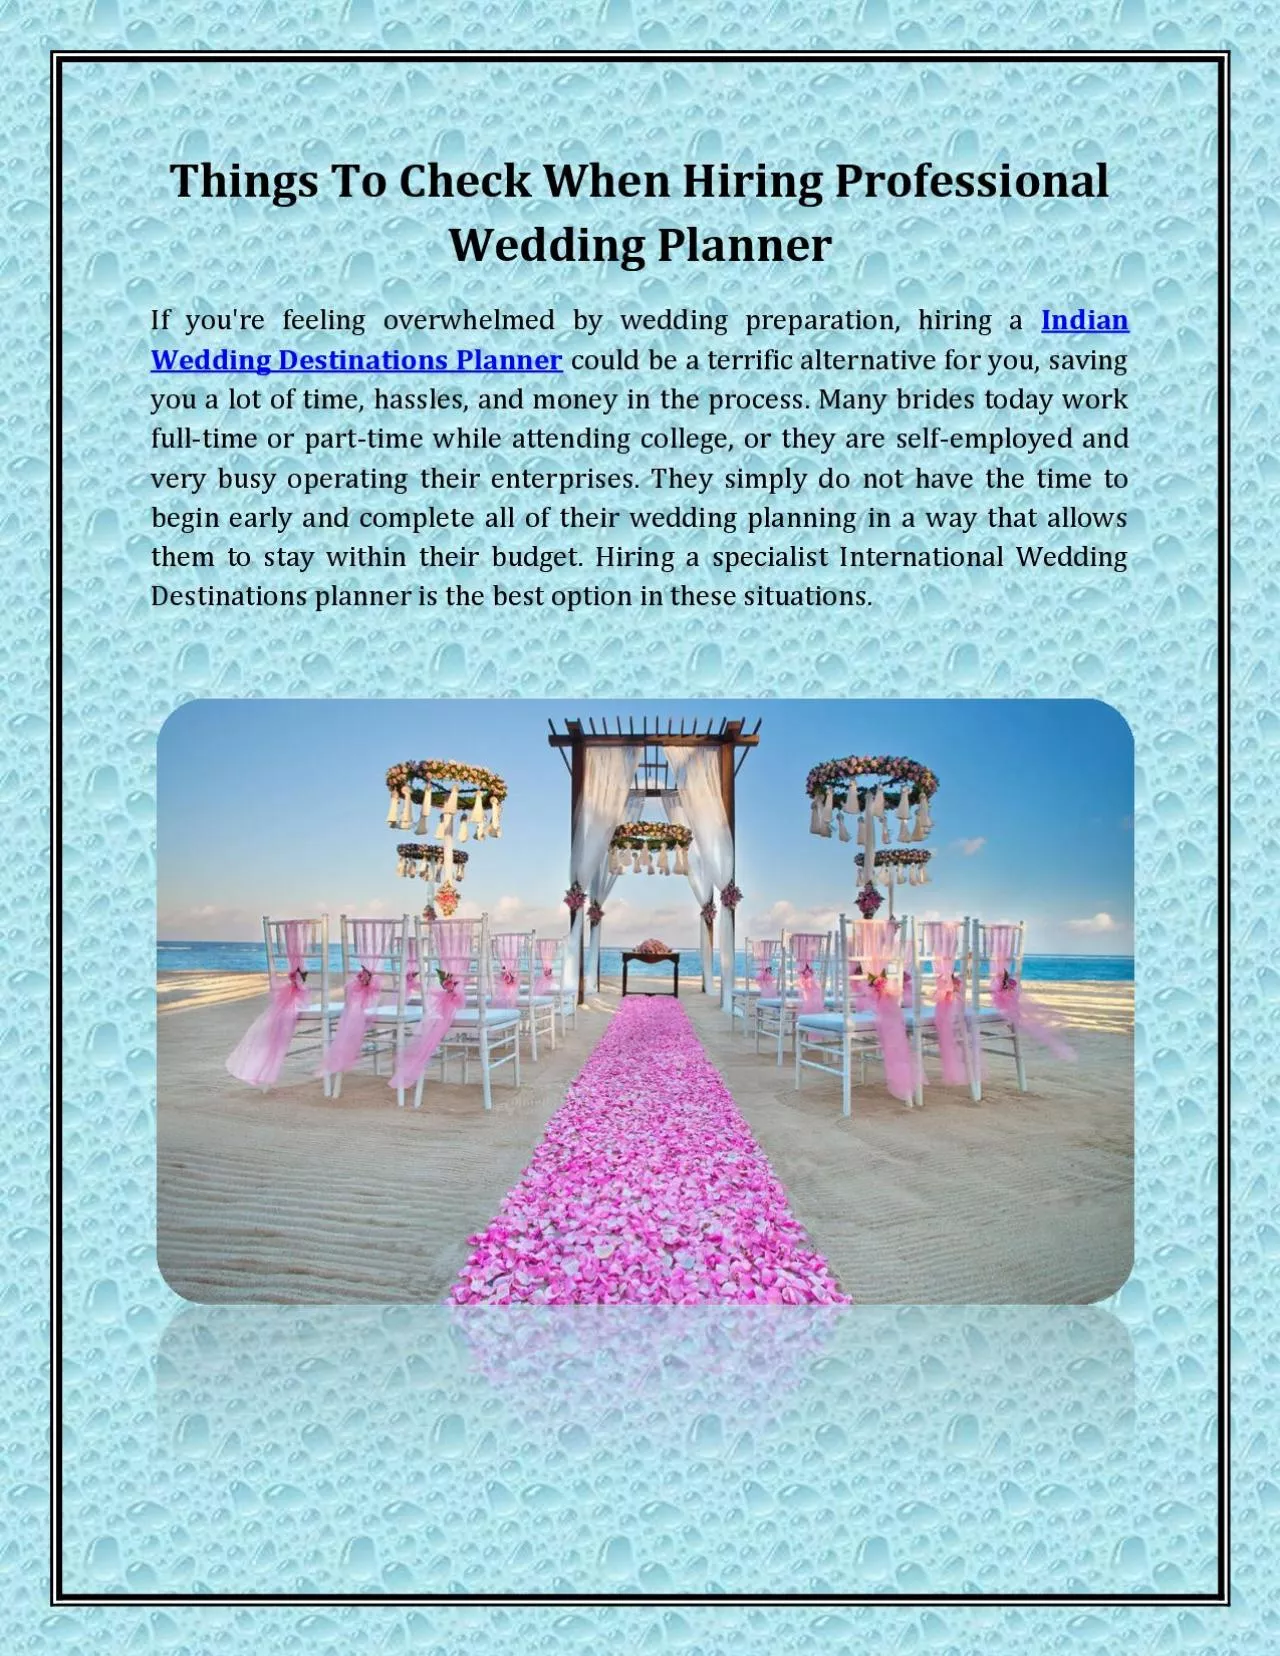 Things To Check When Hiring Professional Wedding Planner